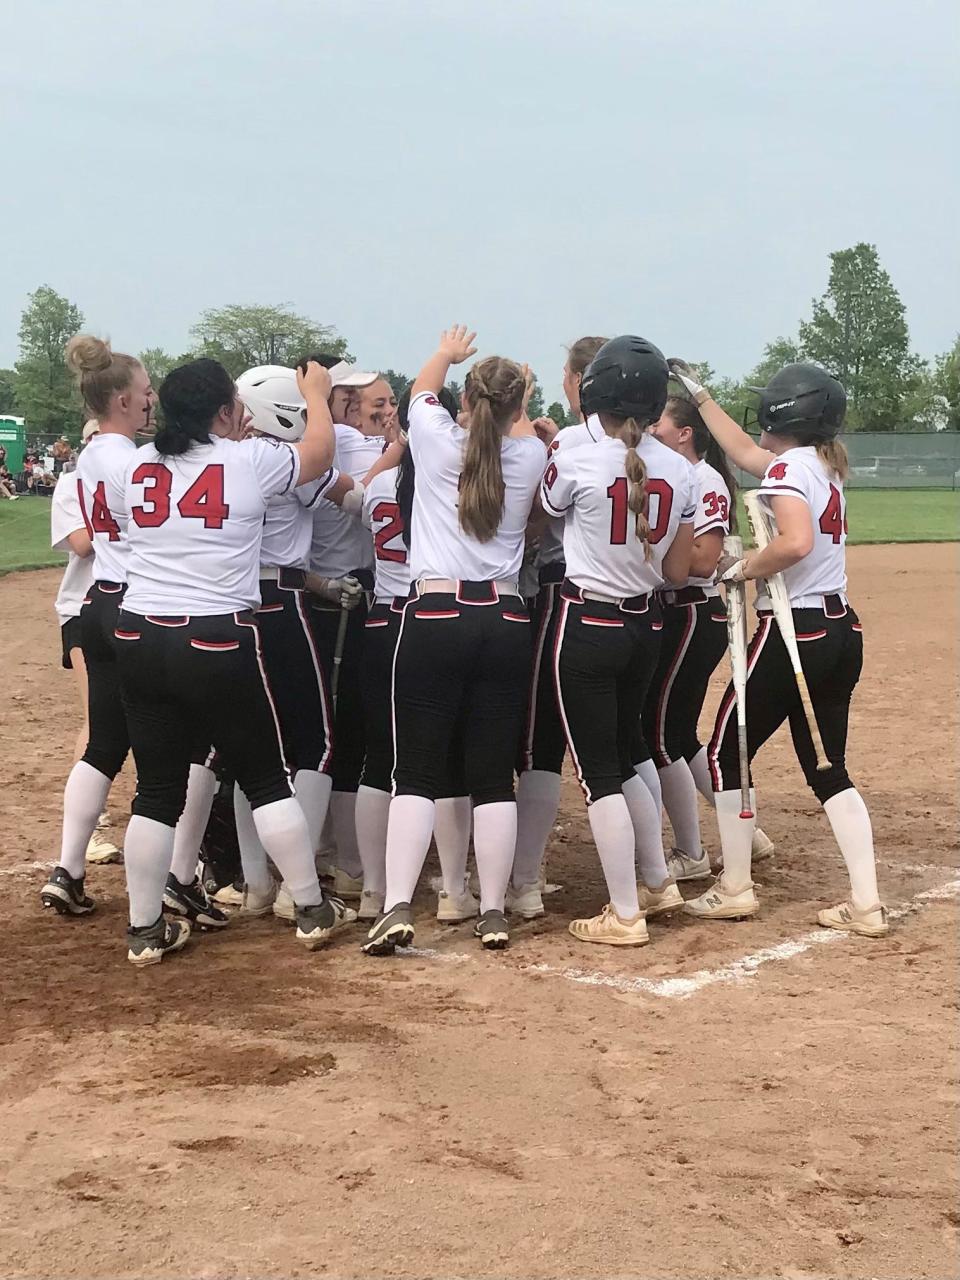 The Pirates celebrate a two-run home run hit by Haliee Edgell during a Division III district championship softball game Friday night at Pickerington Central.